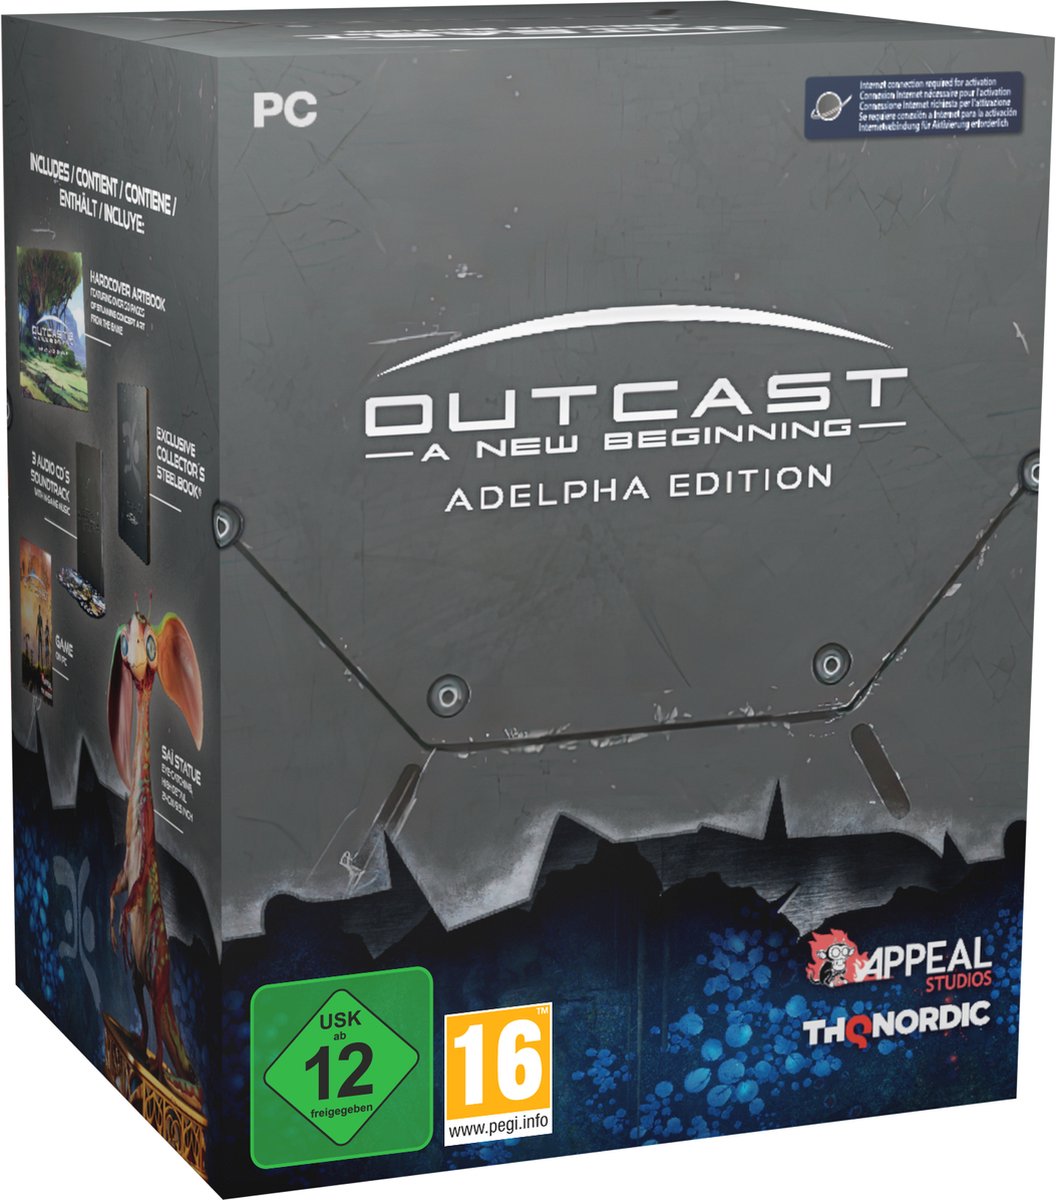 Outcast 2: A New Beginning - Adelpha Edition (PC), THQ Nordic